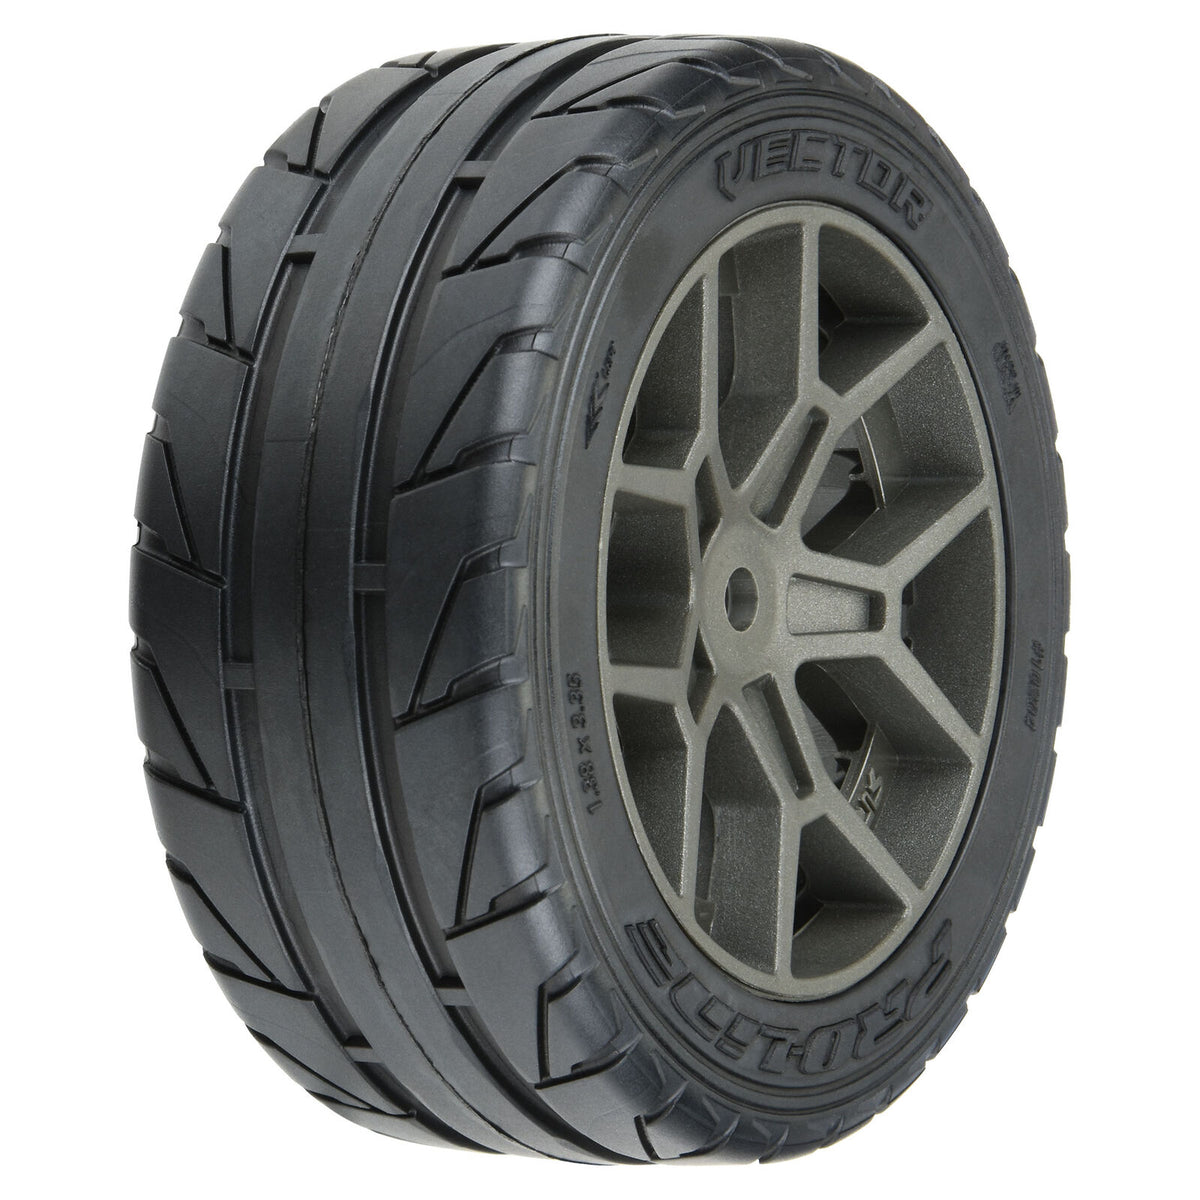 1/8 Vector S3 Front/Rear 35/85 2.4" Belted Mounted Tires, 14mm Gray: Vendetta - PRO1020410